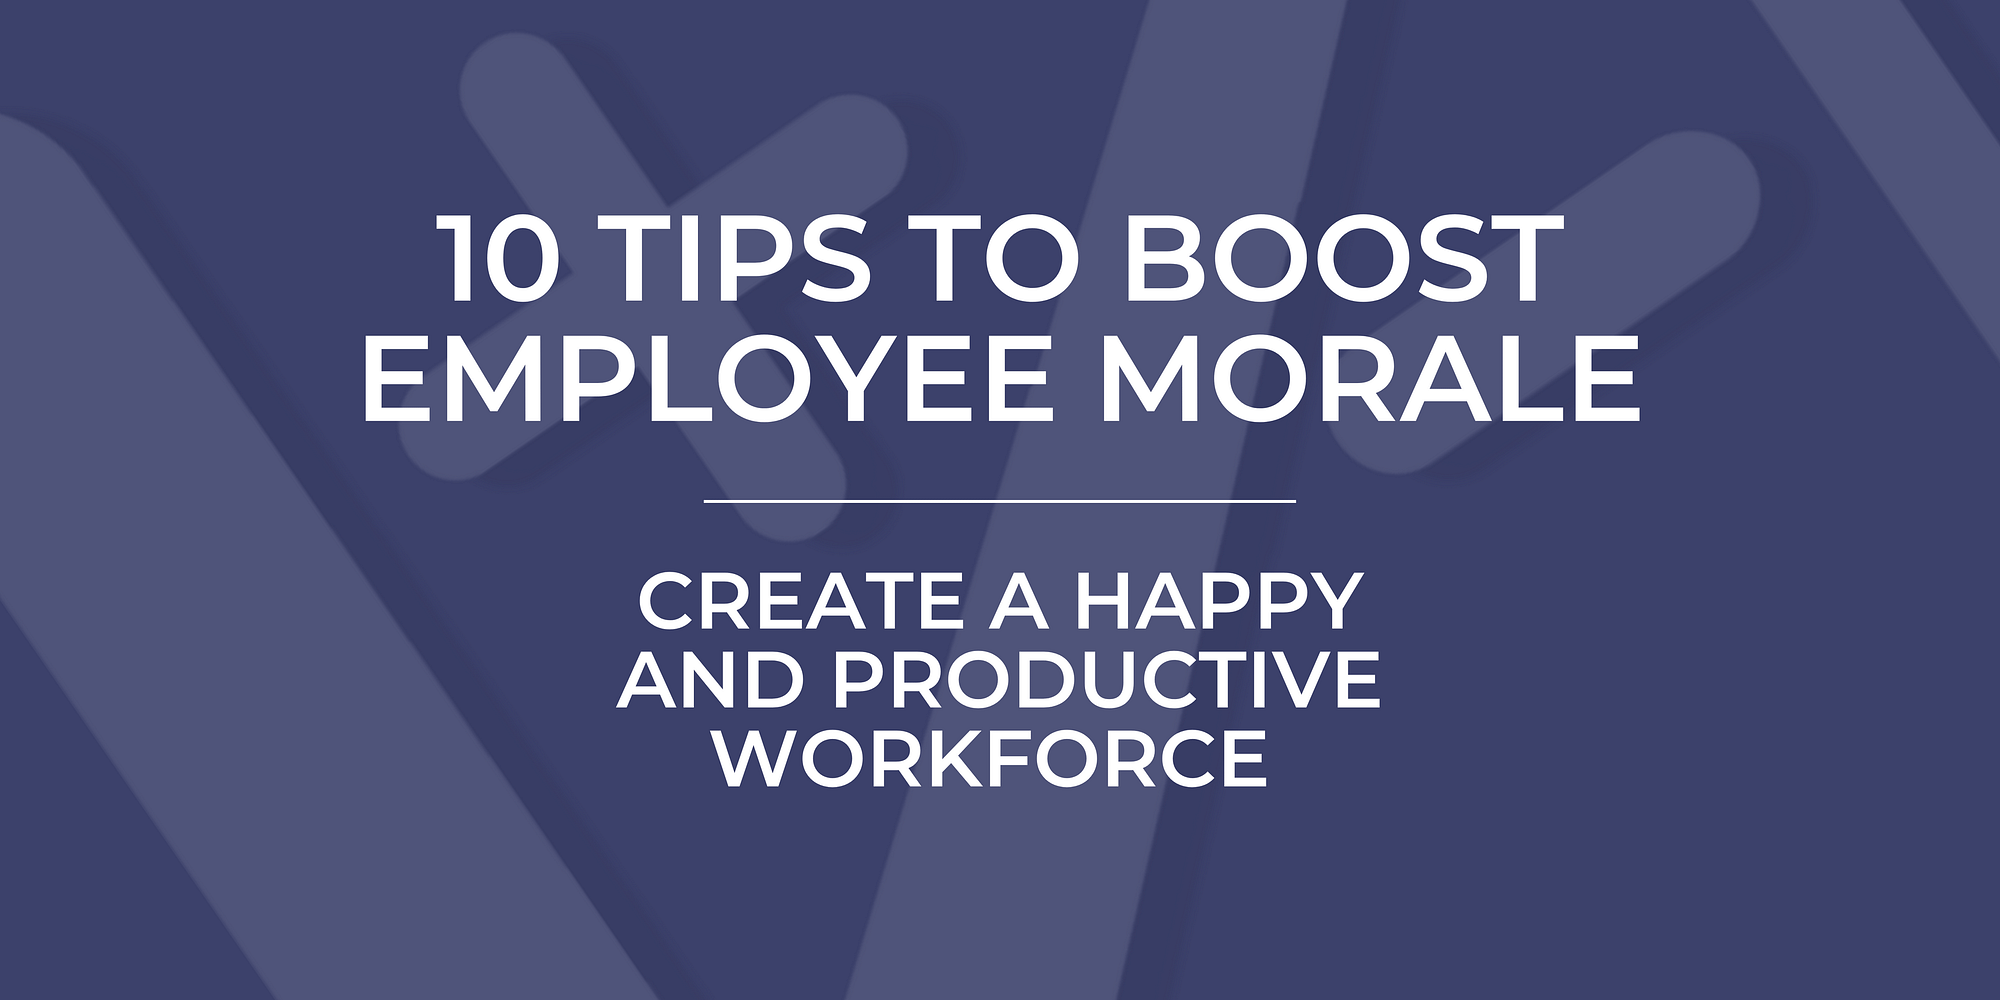 10 Tips to Boost Employee Morale: Create a Happy and Productive Workforce